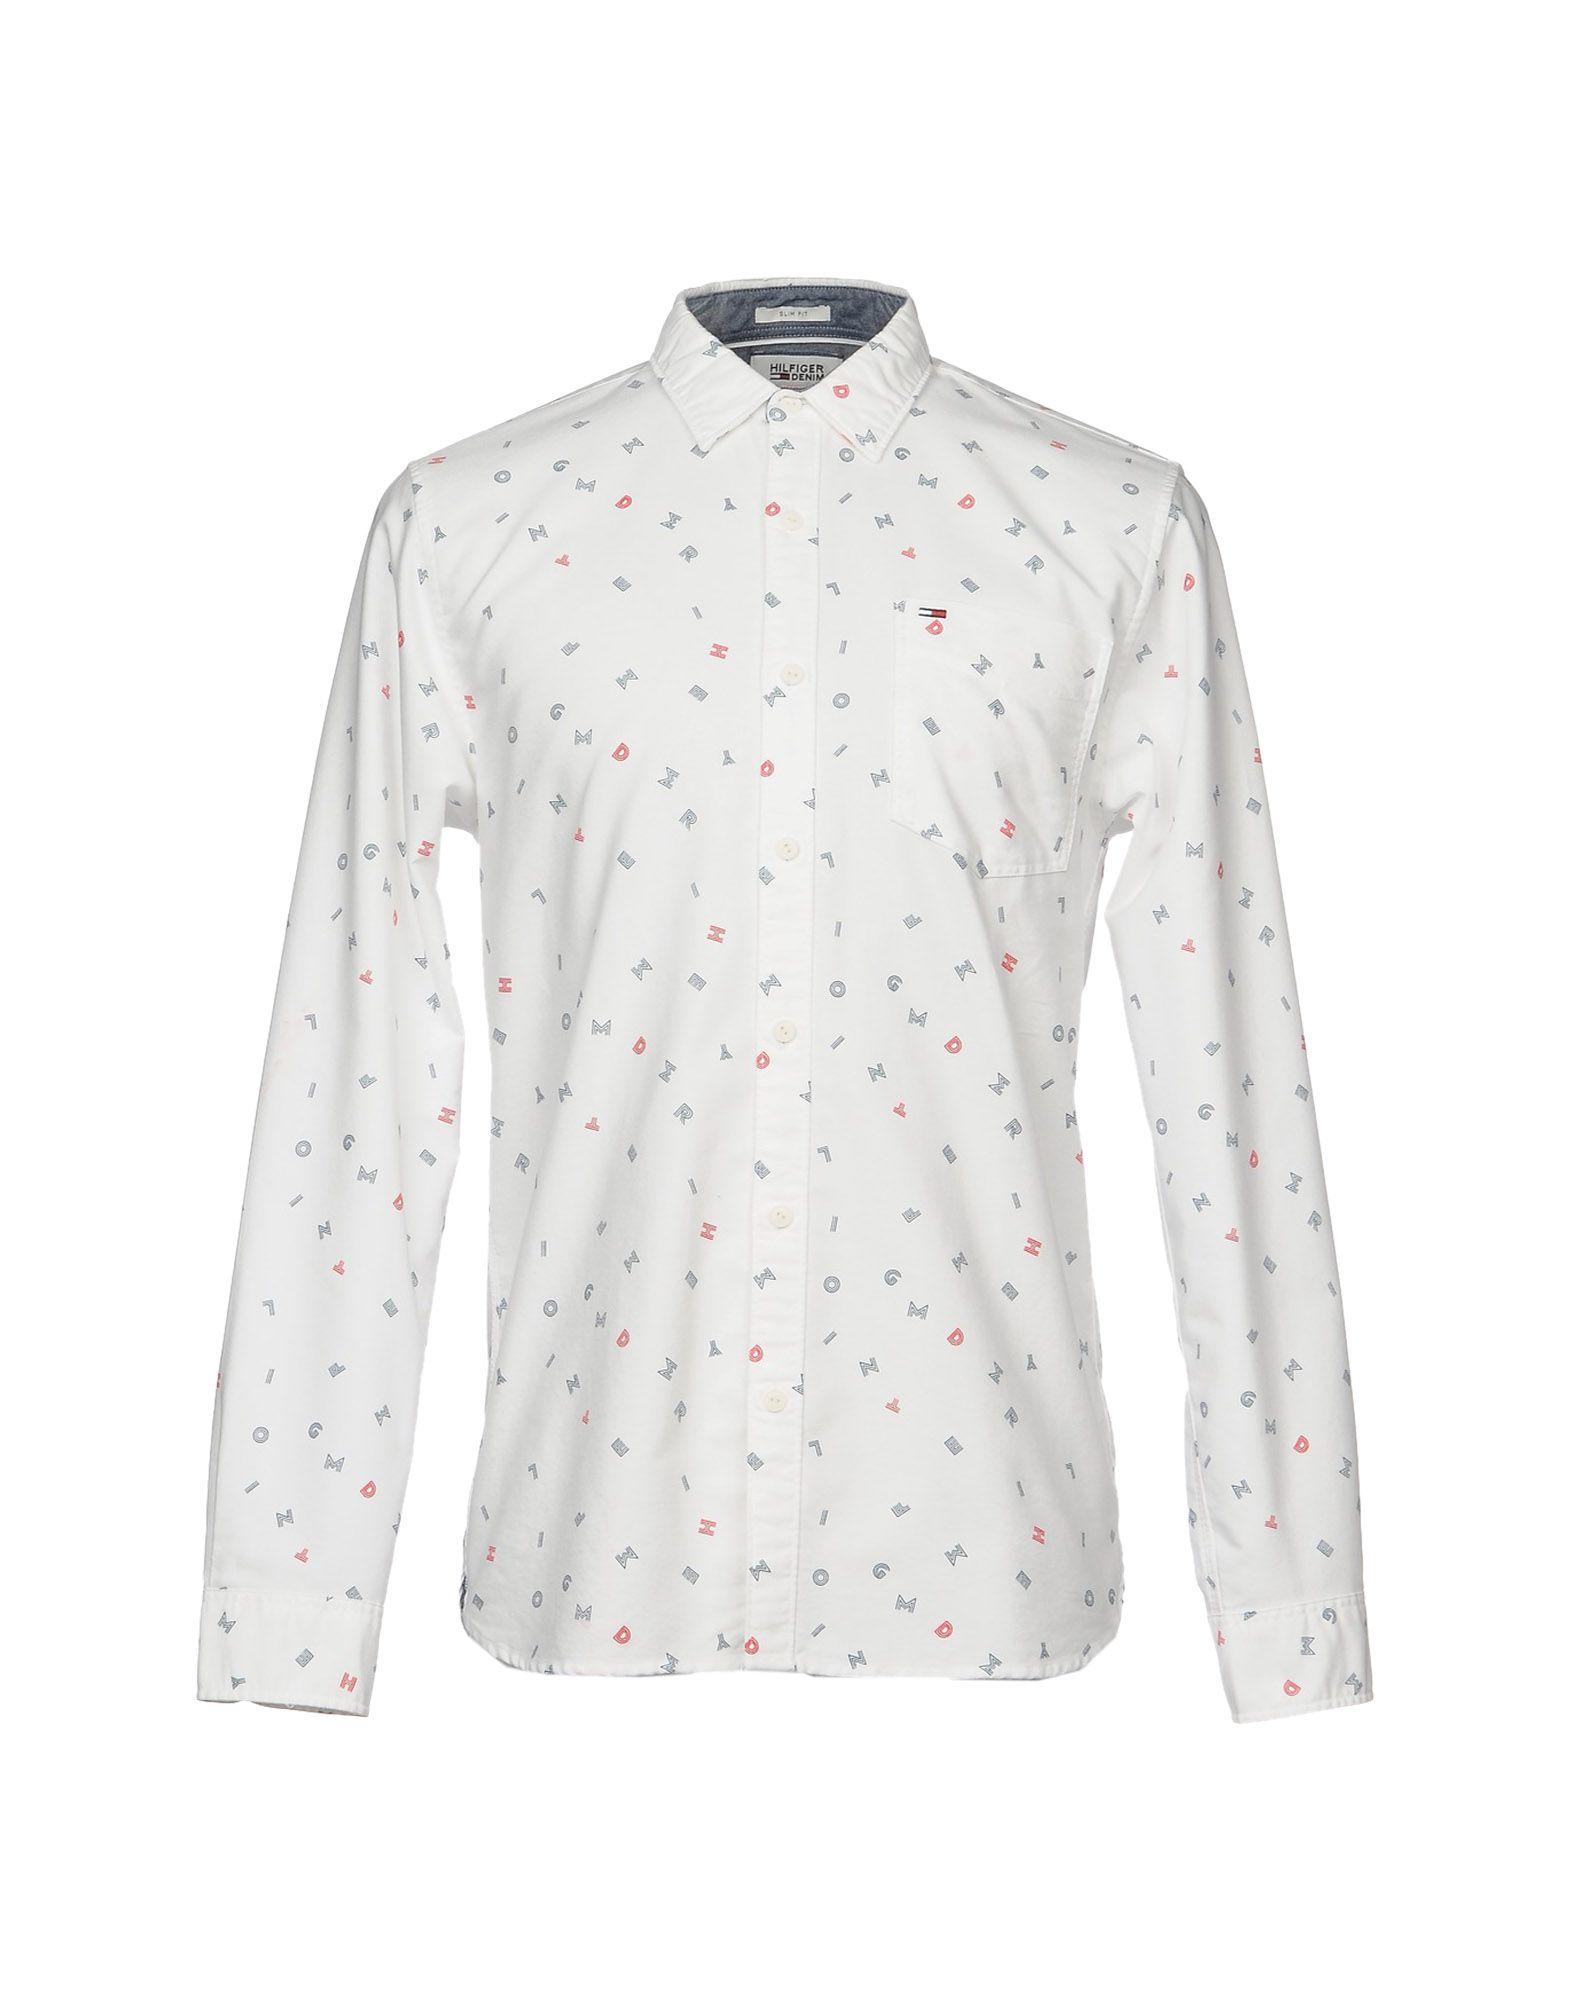 Tommy Hilfiger Cotton Shirt in White for Men - Lyst